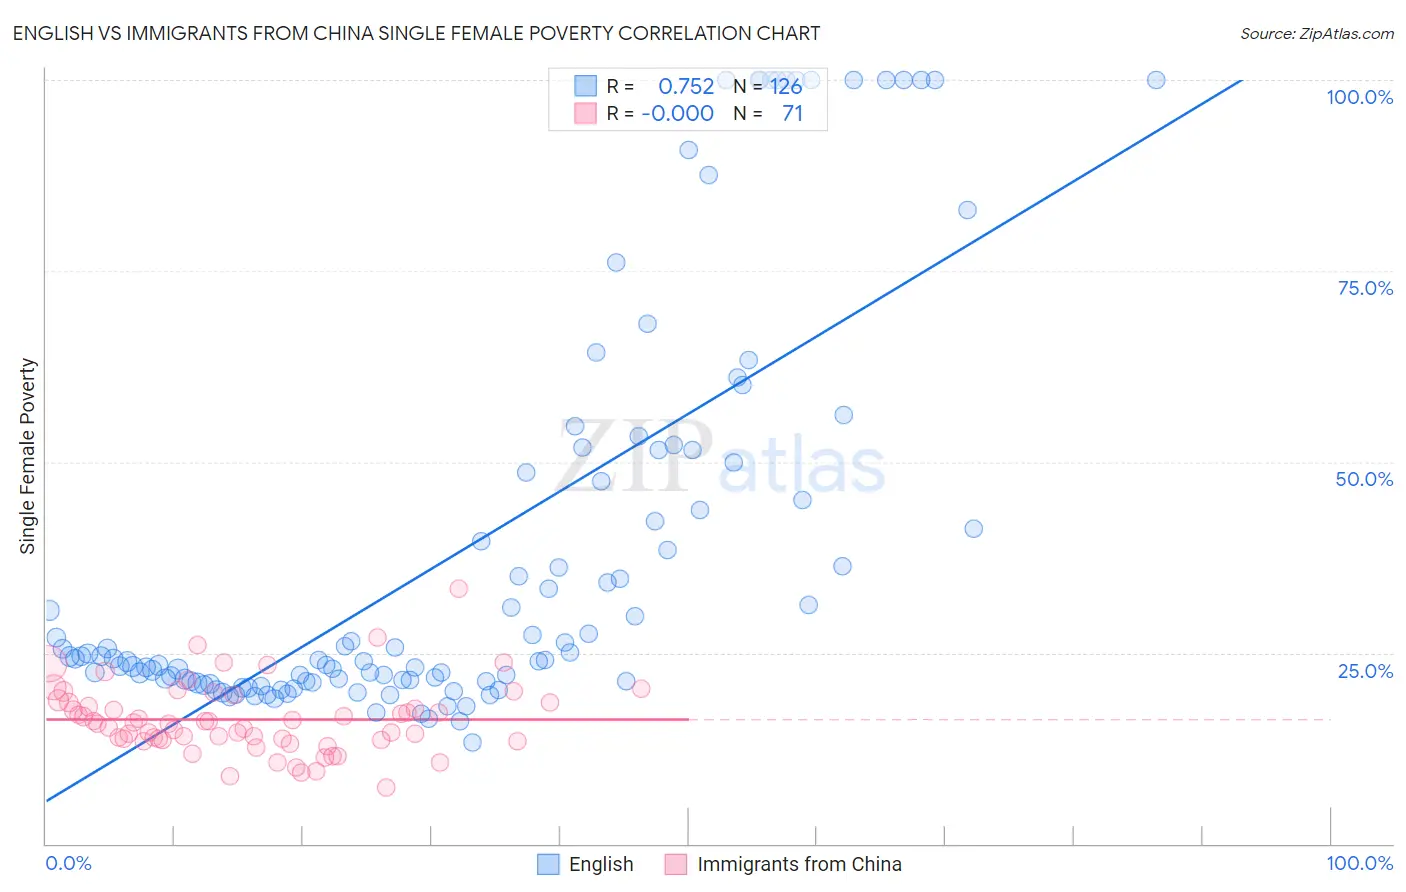 English vs Immigrants from China Single Female Poverty